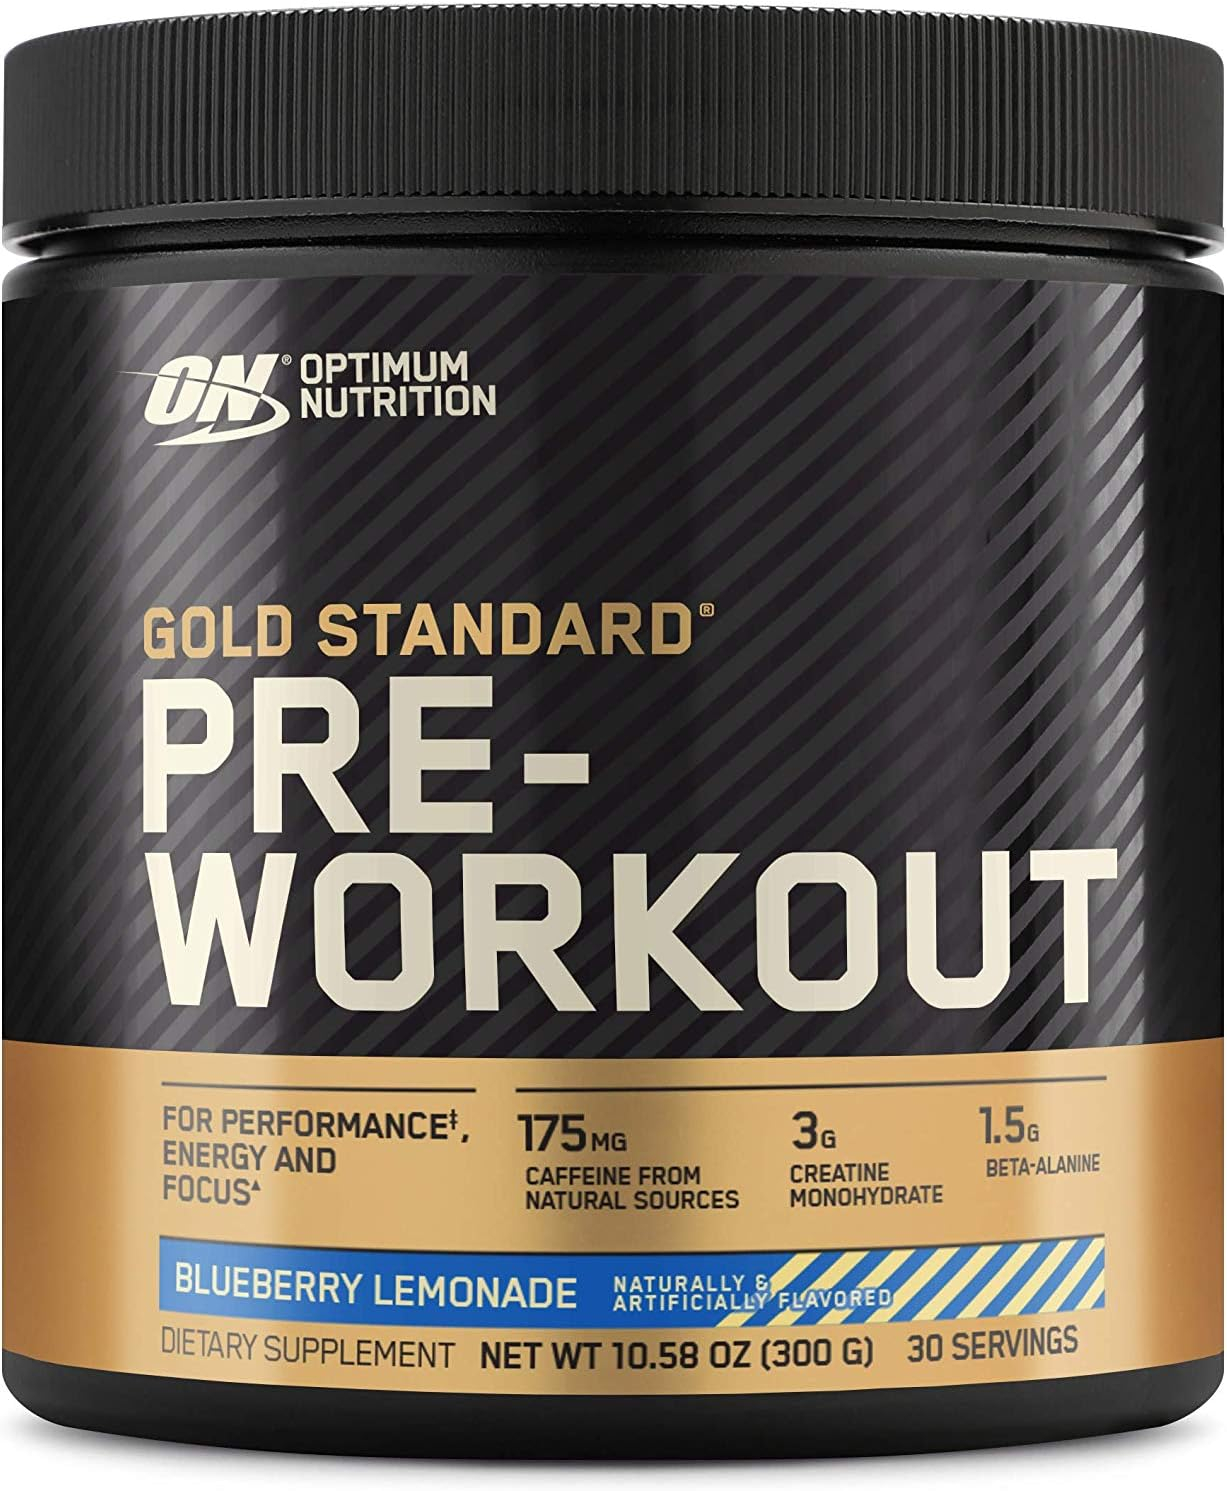 Optimum Nutrition Gold Standard Pre-Workout, Vitamin D for Immune Support, with Creatine, Beta-Alanine, and Caffeine for Energy, Keto Friendly, Blueberry Lemonade, 30 Servings (Packaging May Vary)